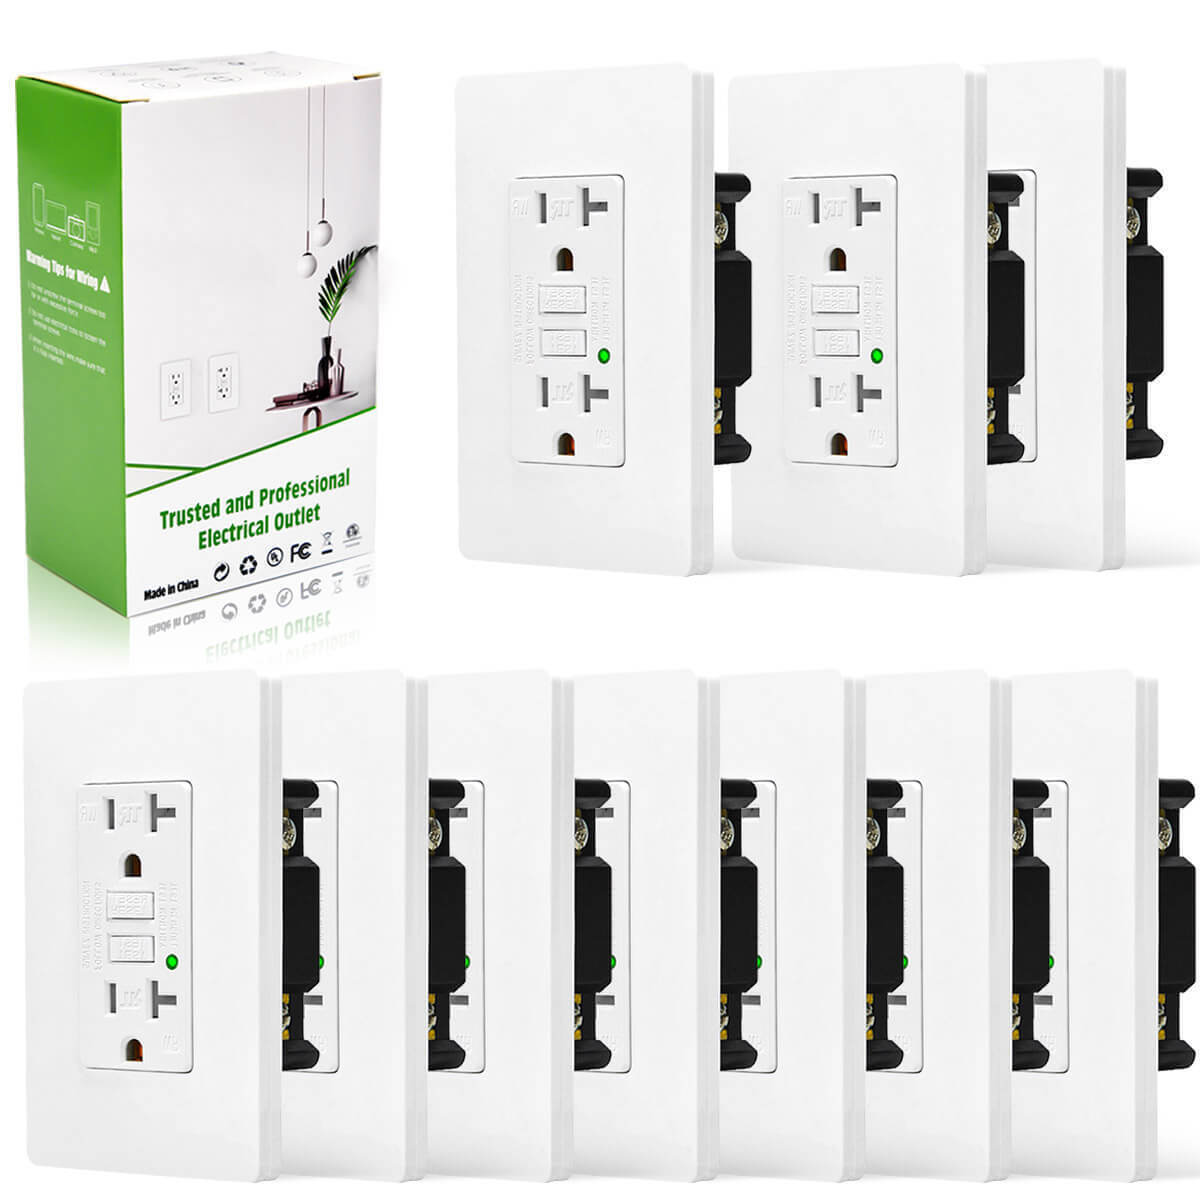 10PK 20AMP GFCI GFI Safety Outlet Receptacle w/ Wall Plate LED Indicator TR WR